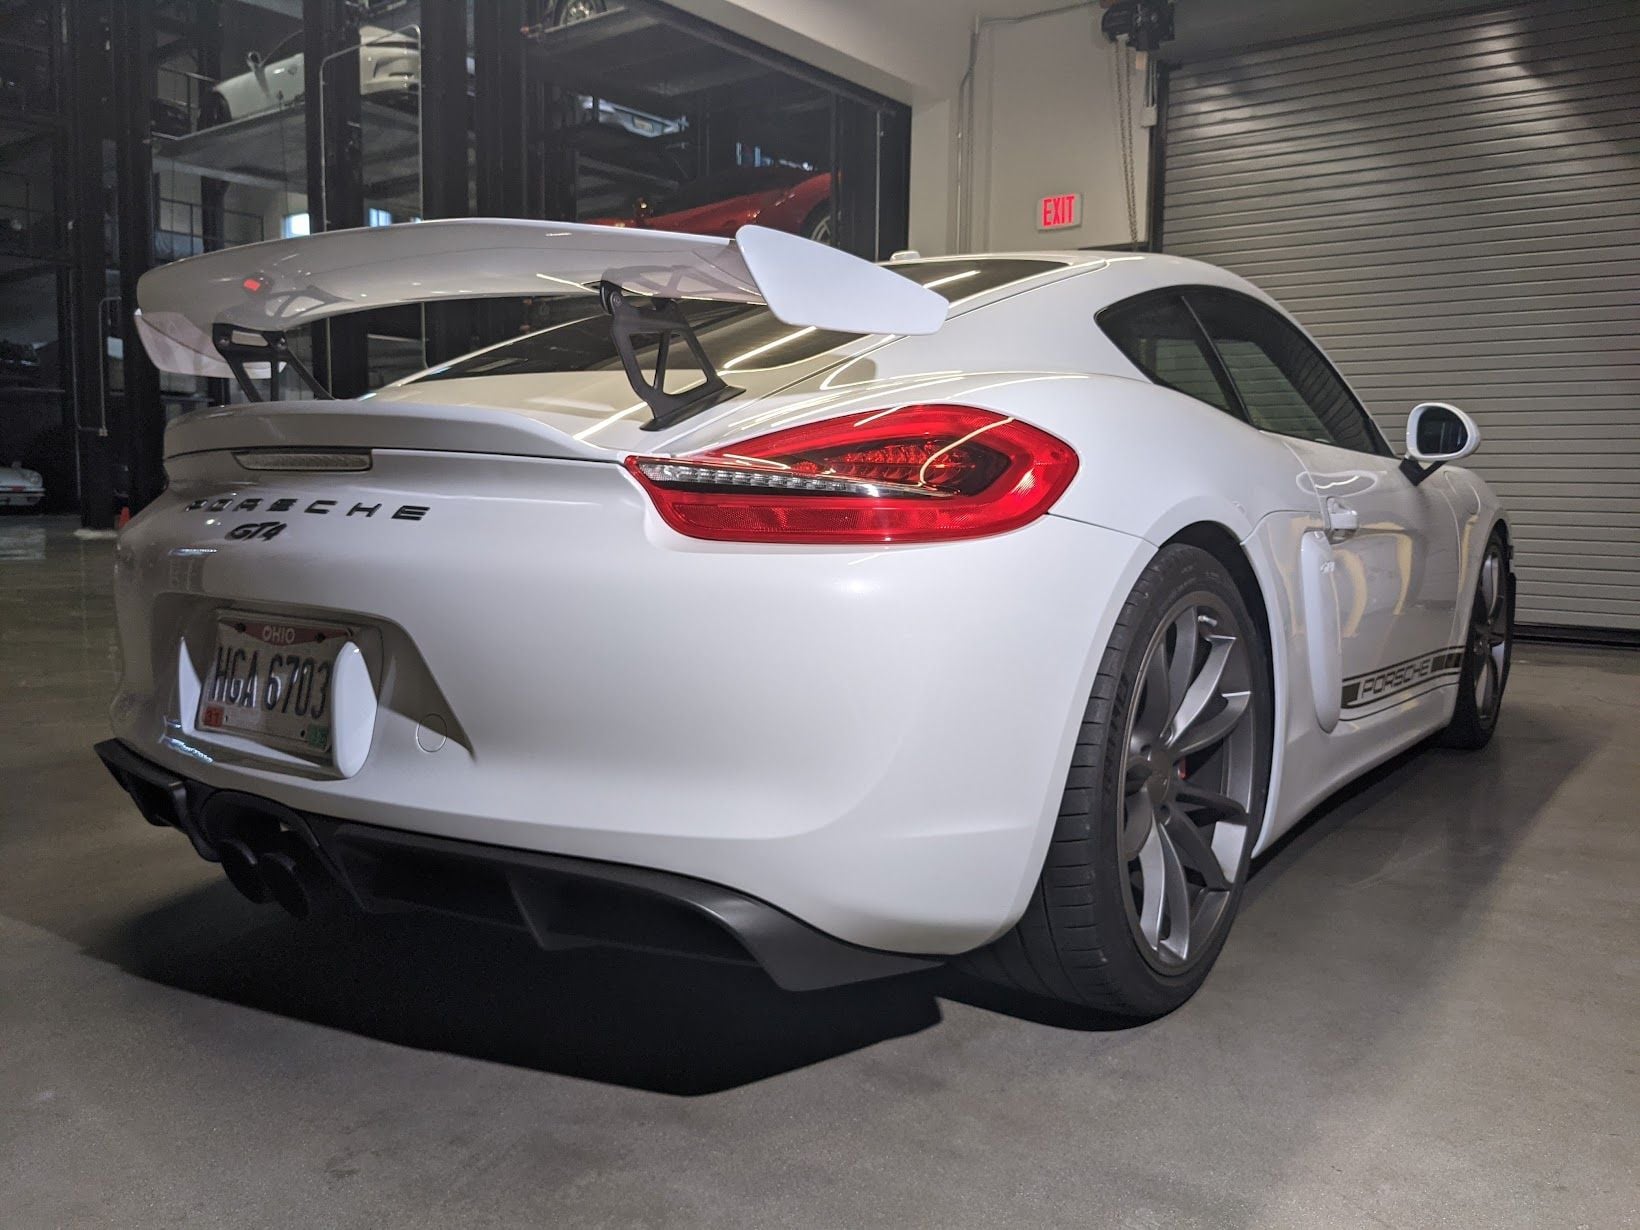 2016 Porsche Cayman GT4 - 2016 Porsche GT4 - Manual / 37k miles - PENDING SALE - Used - VIN WP0AC2A84GK192646 - 37,000 Miles - 6 cyl - 2WD - Manual - Coupe - White - Los Angeles, CA 90291, United States